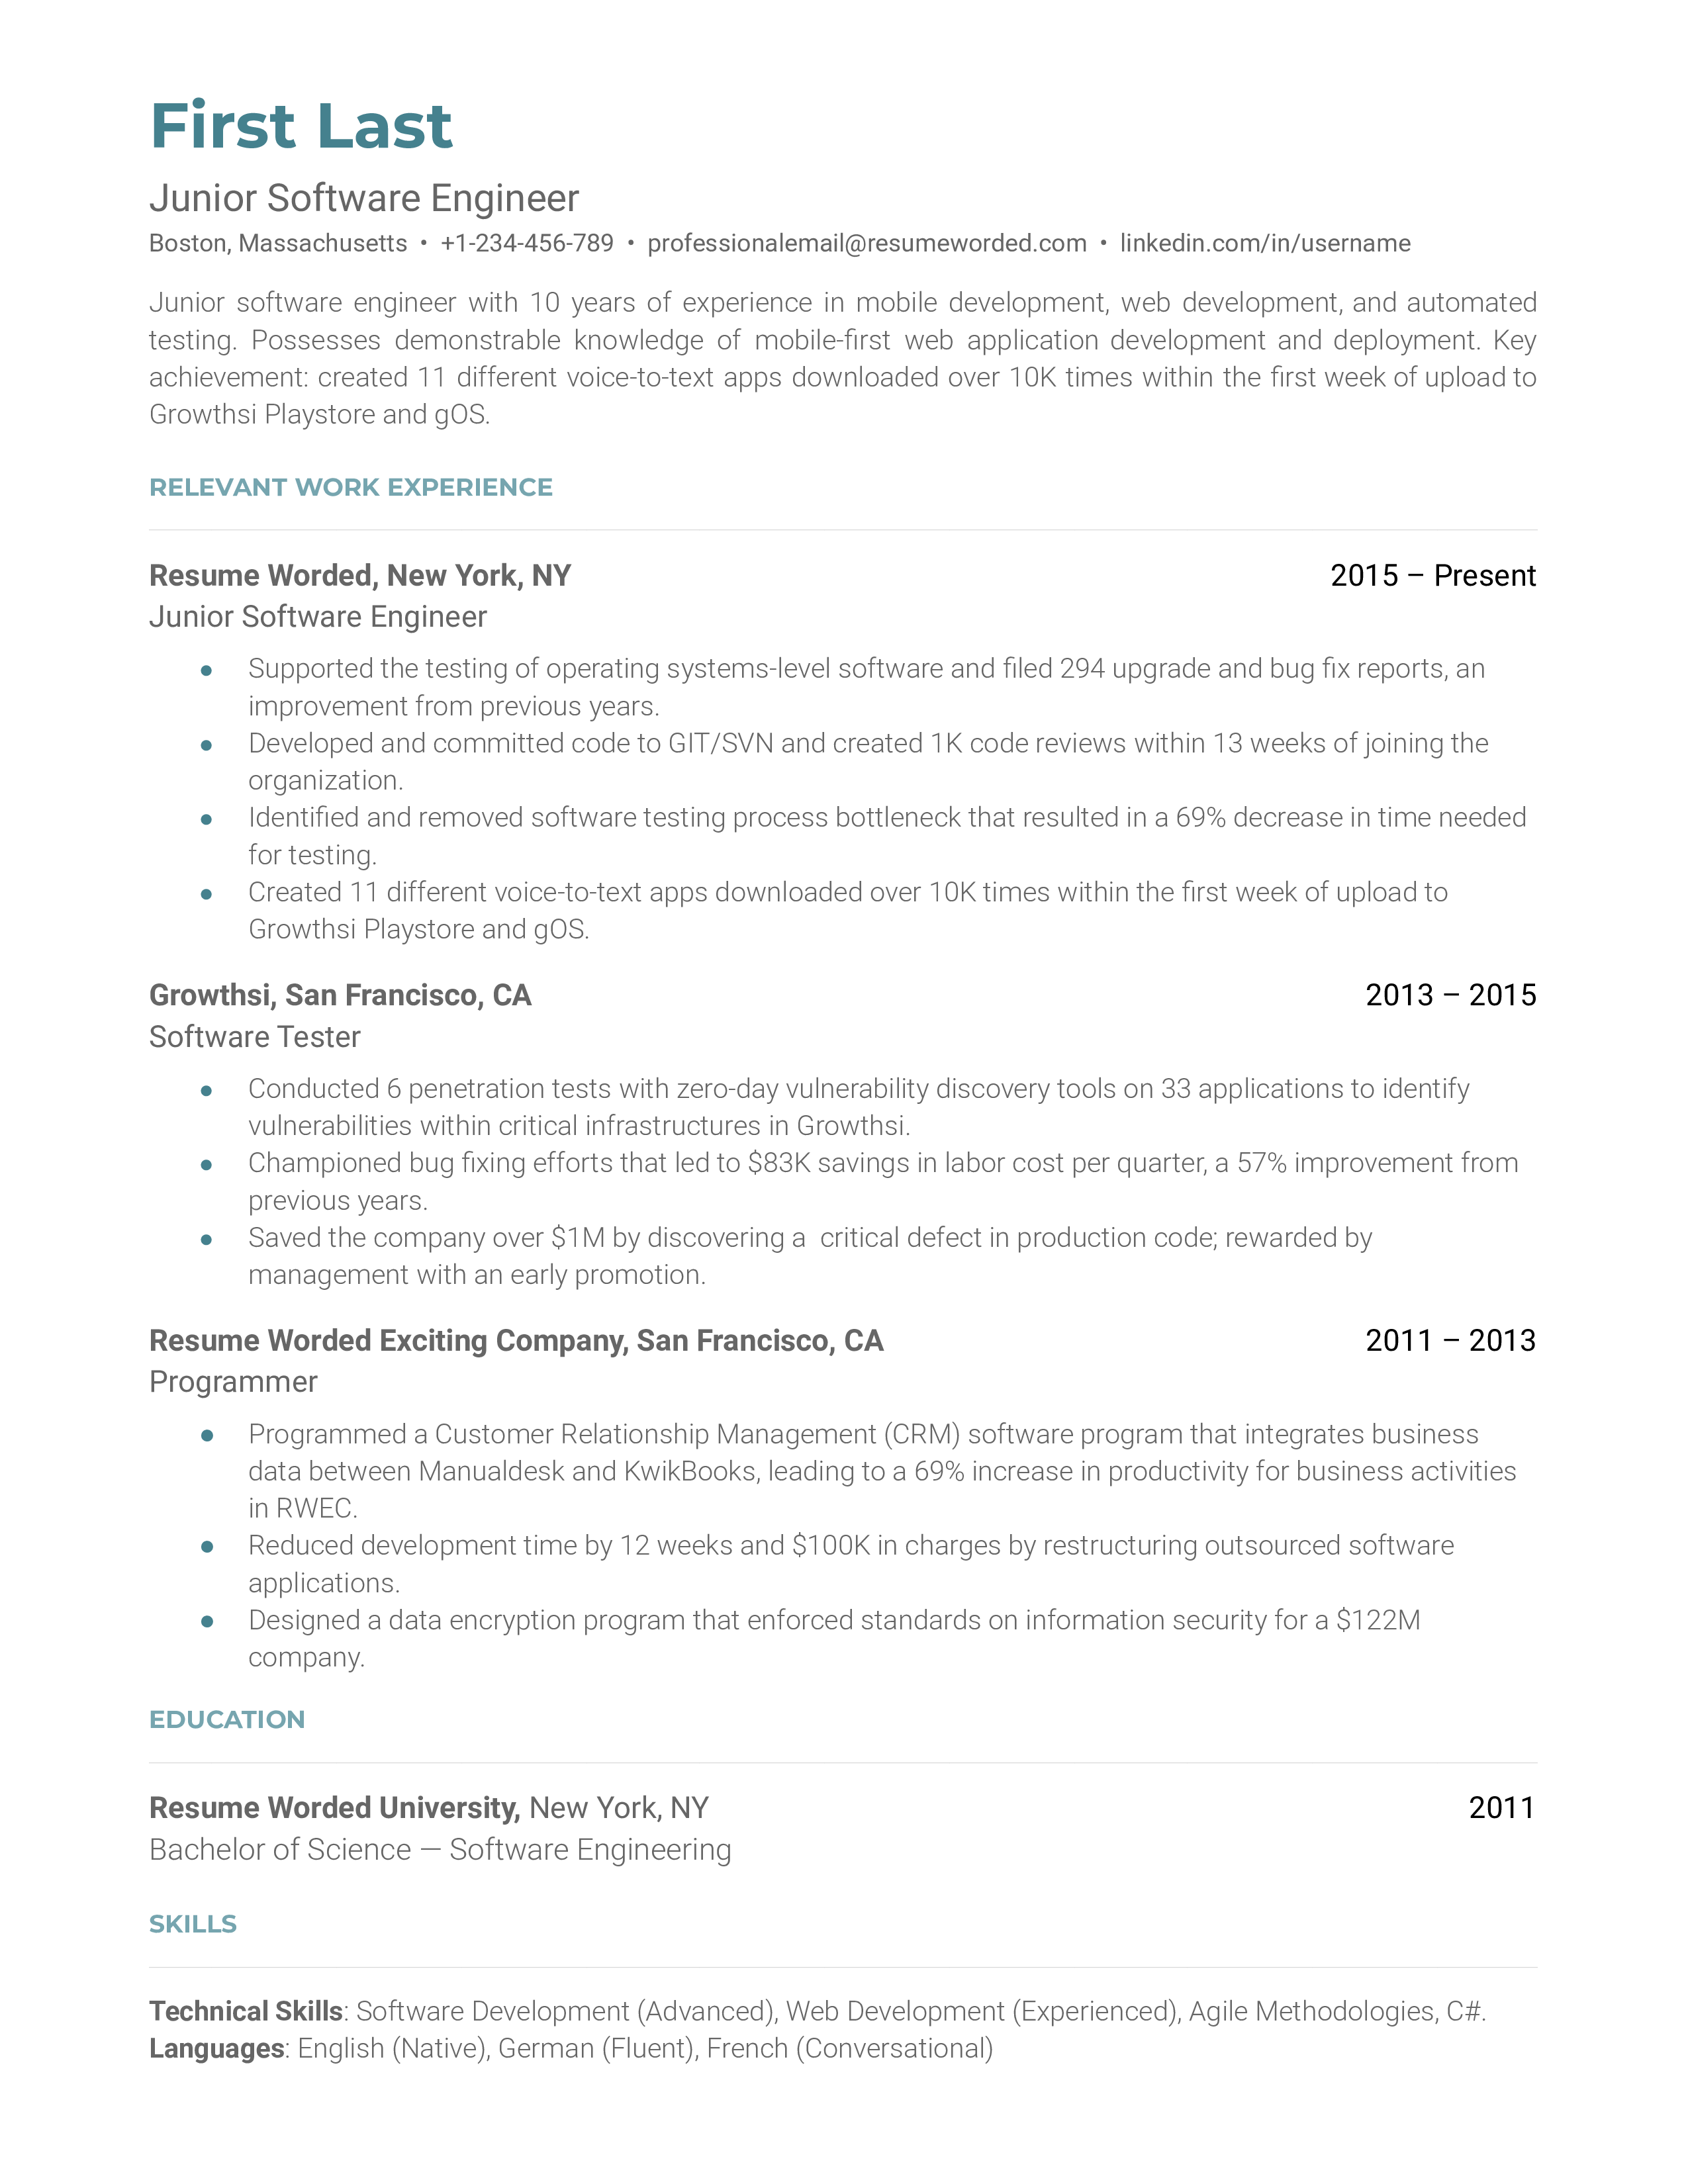 A junior software engineer resume sample that highlights the applicant’s thorough skills list and career growth.